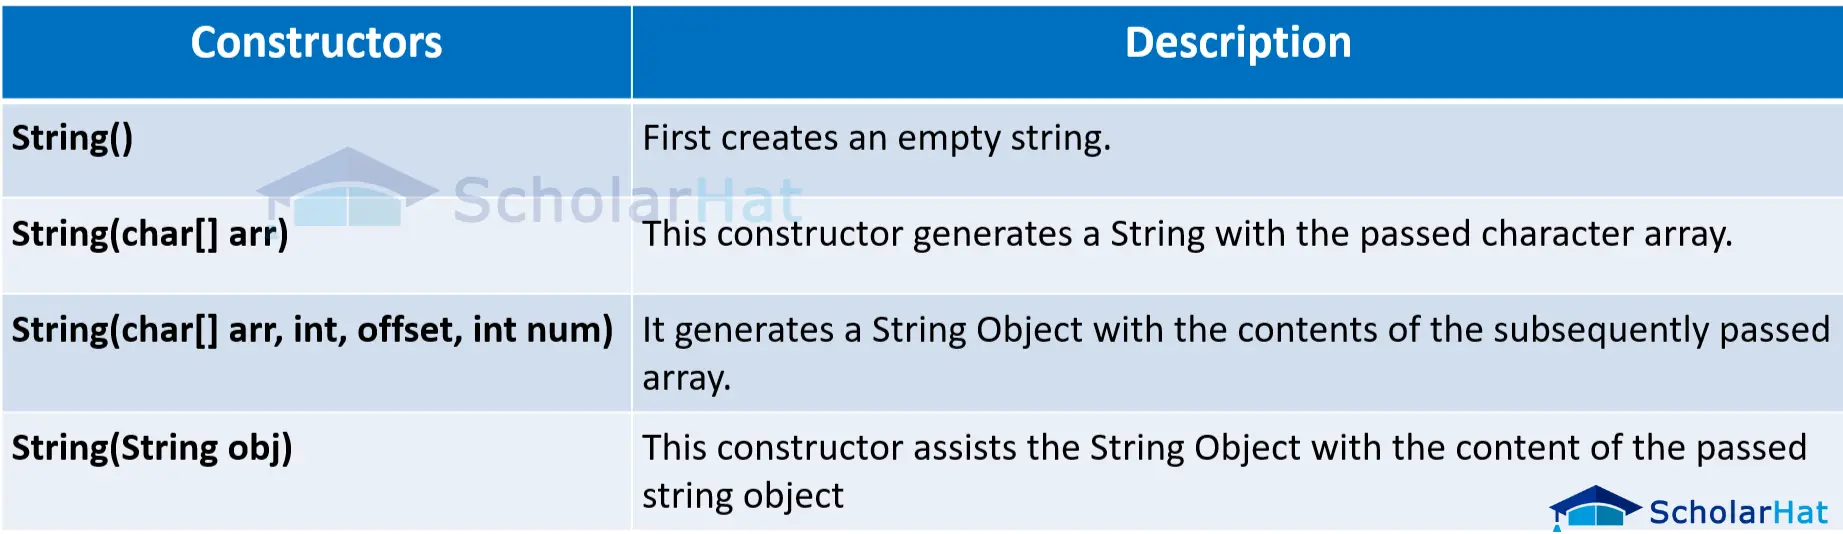 How to Create a String Object?